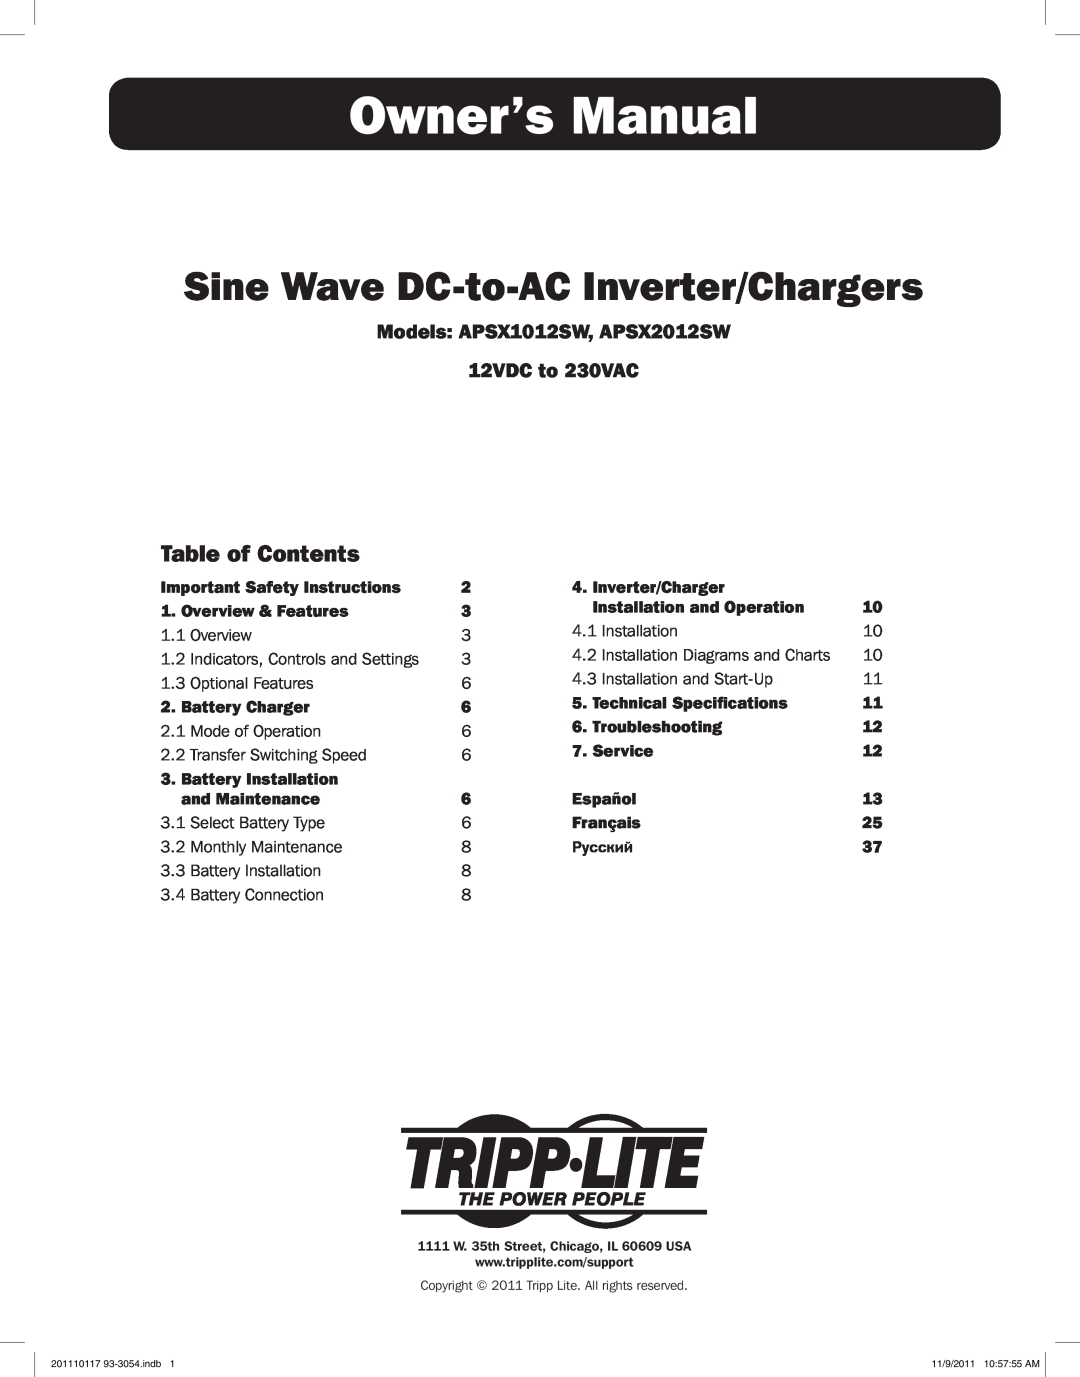 Tripp Lite APSX2012SW owner manual Owner’s Manual, Sine Wave DC-to-AC Inverter/Chargers, Table of Contents, Service 